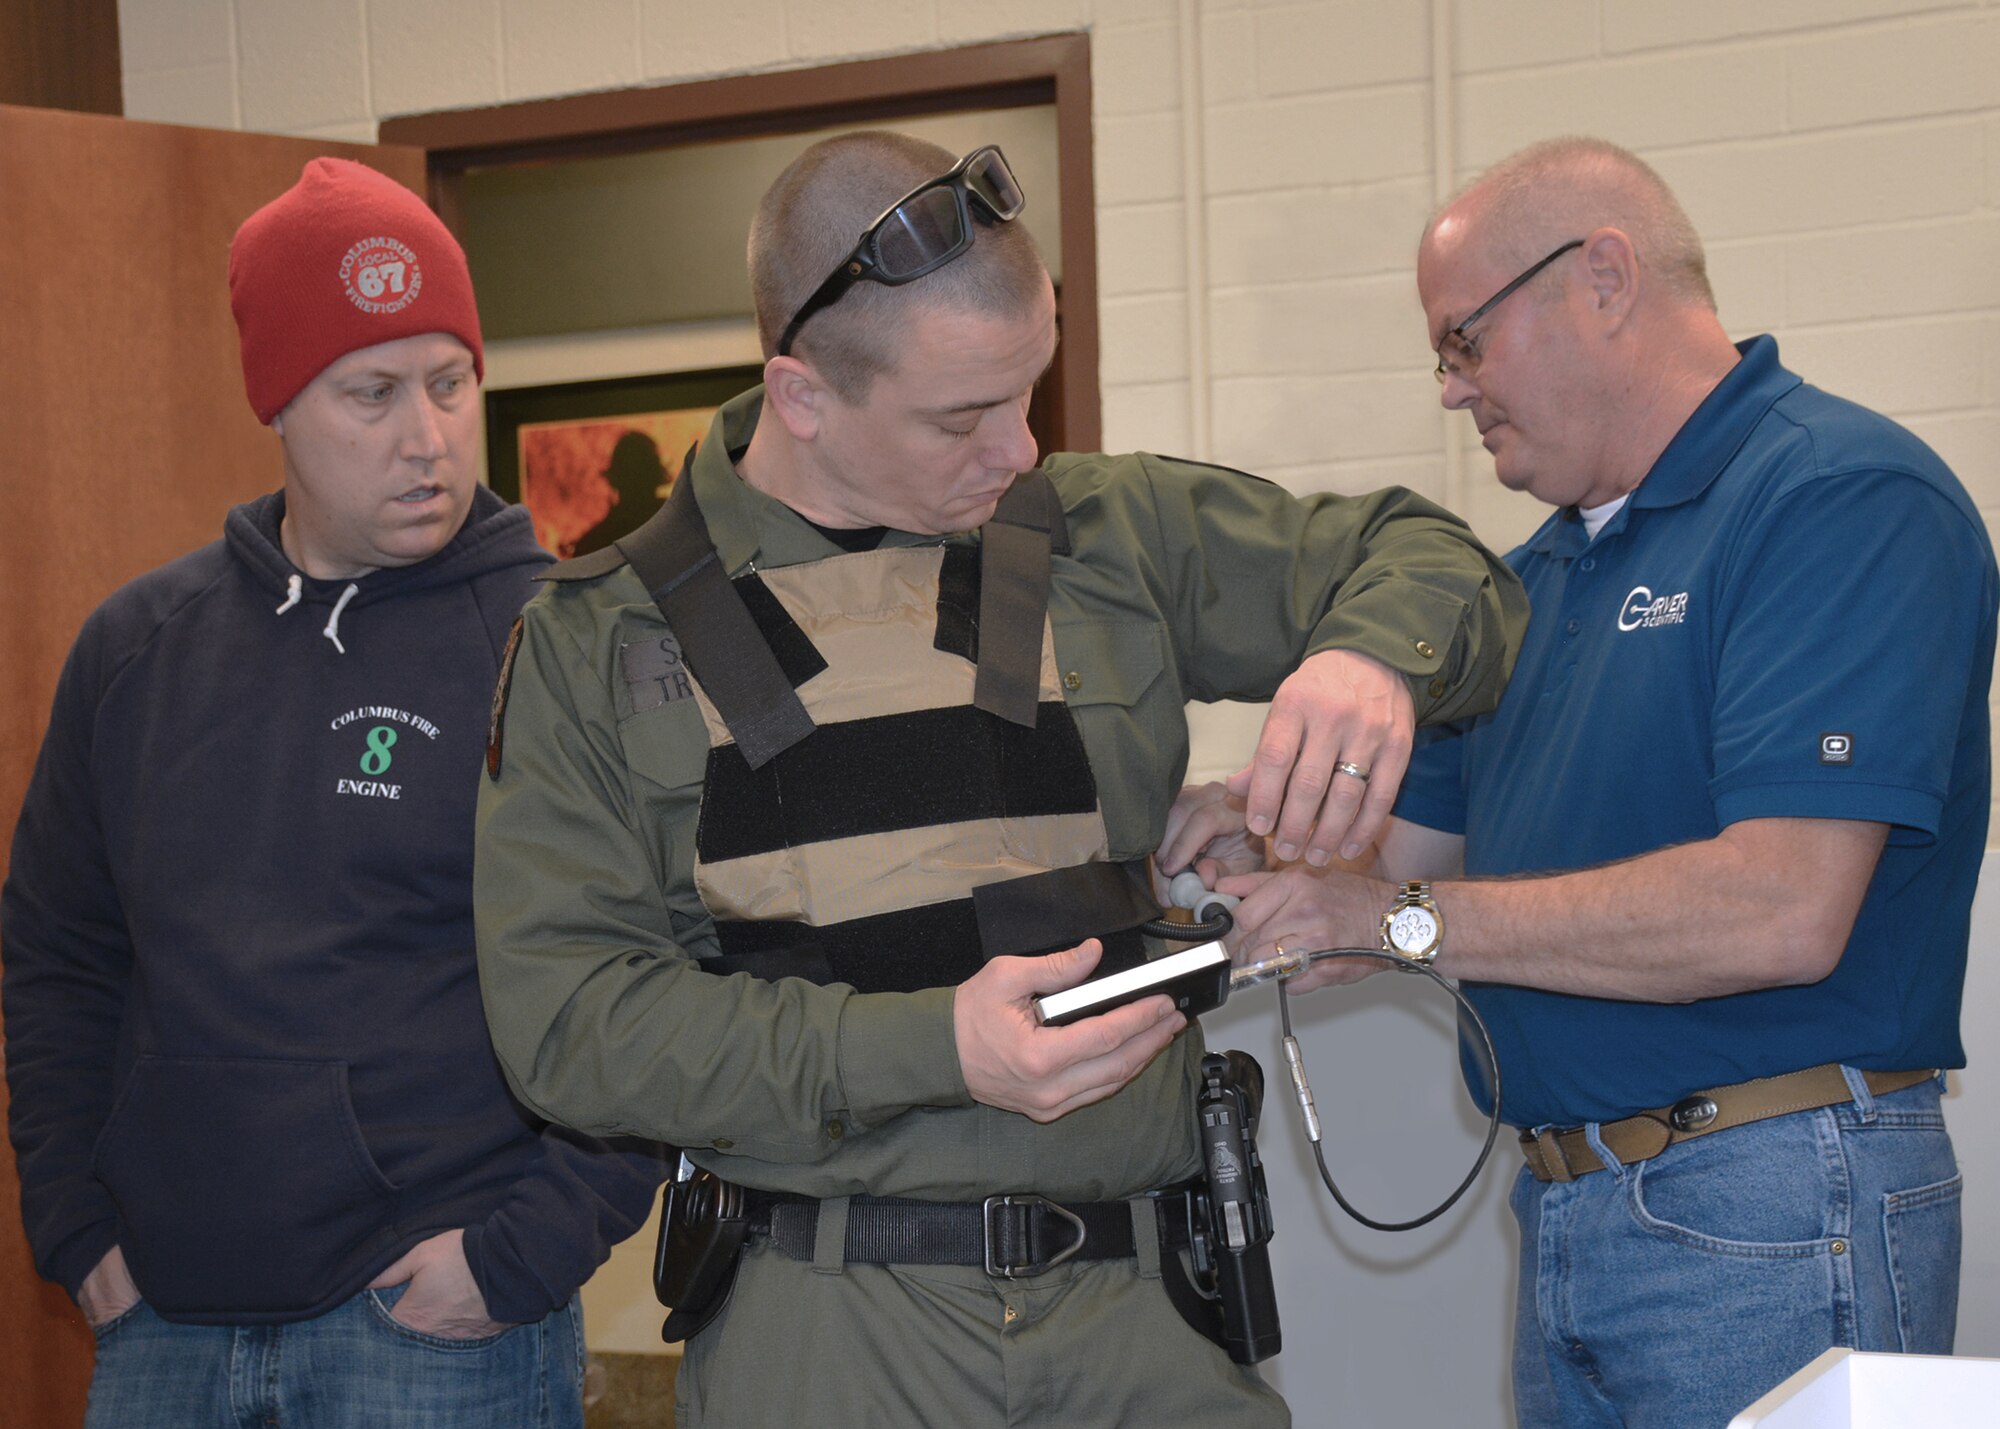 Carver Scientific outfitted Ohio State Highway Patrol personnel with its microclimate cooling technology to test and evaluate during a training exercise at the recent Tech Warrior OPS event. (Courtesy photo)